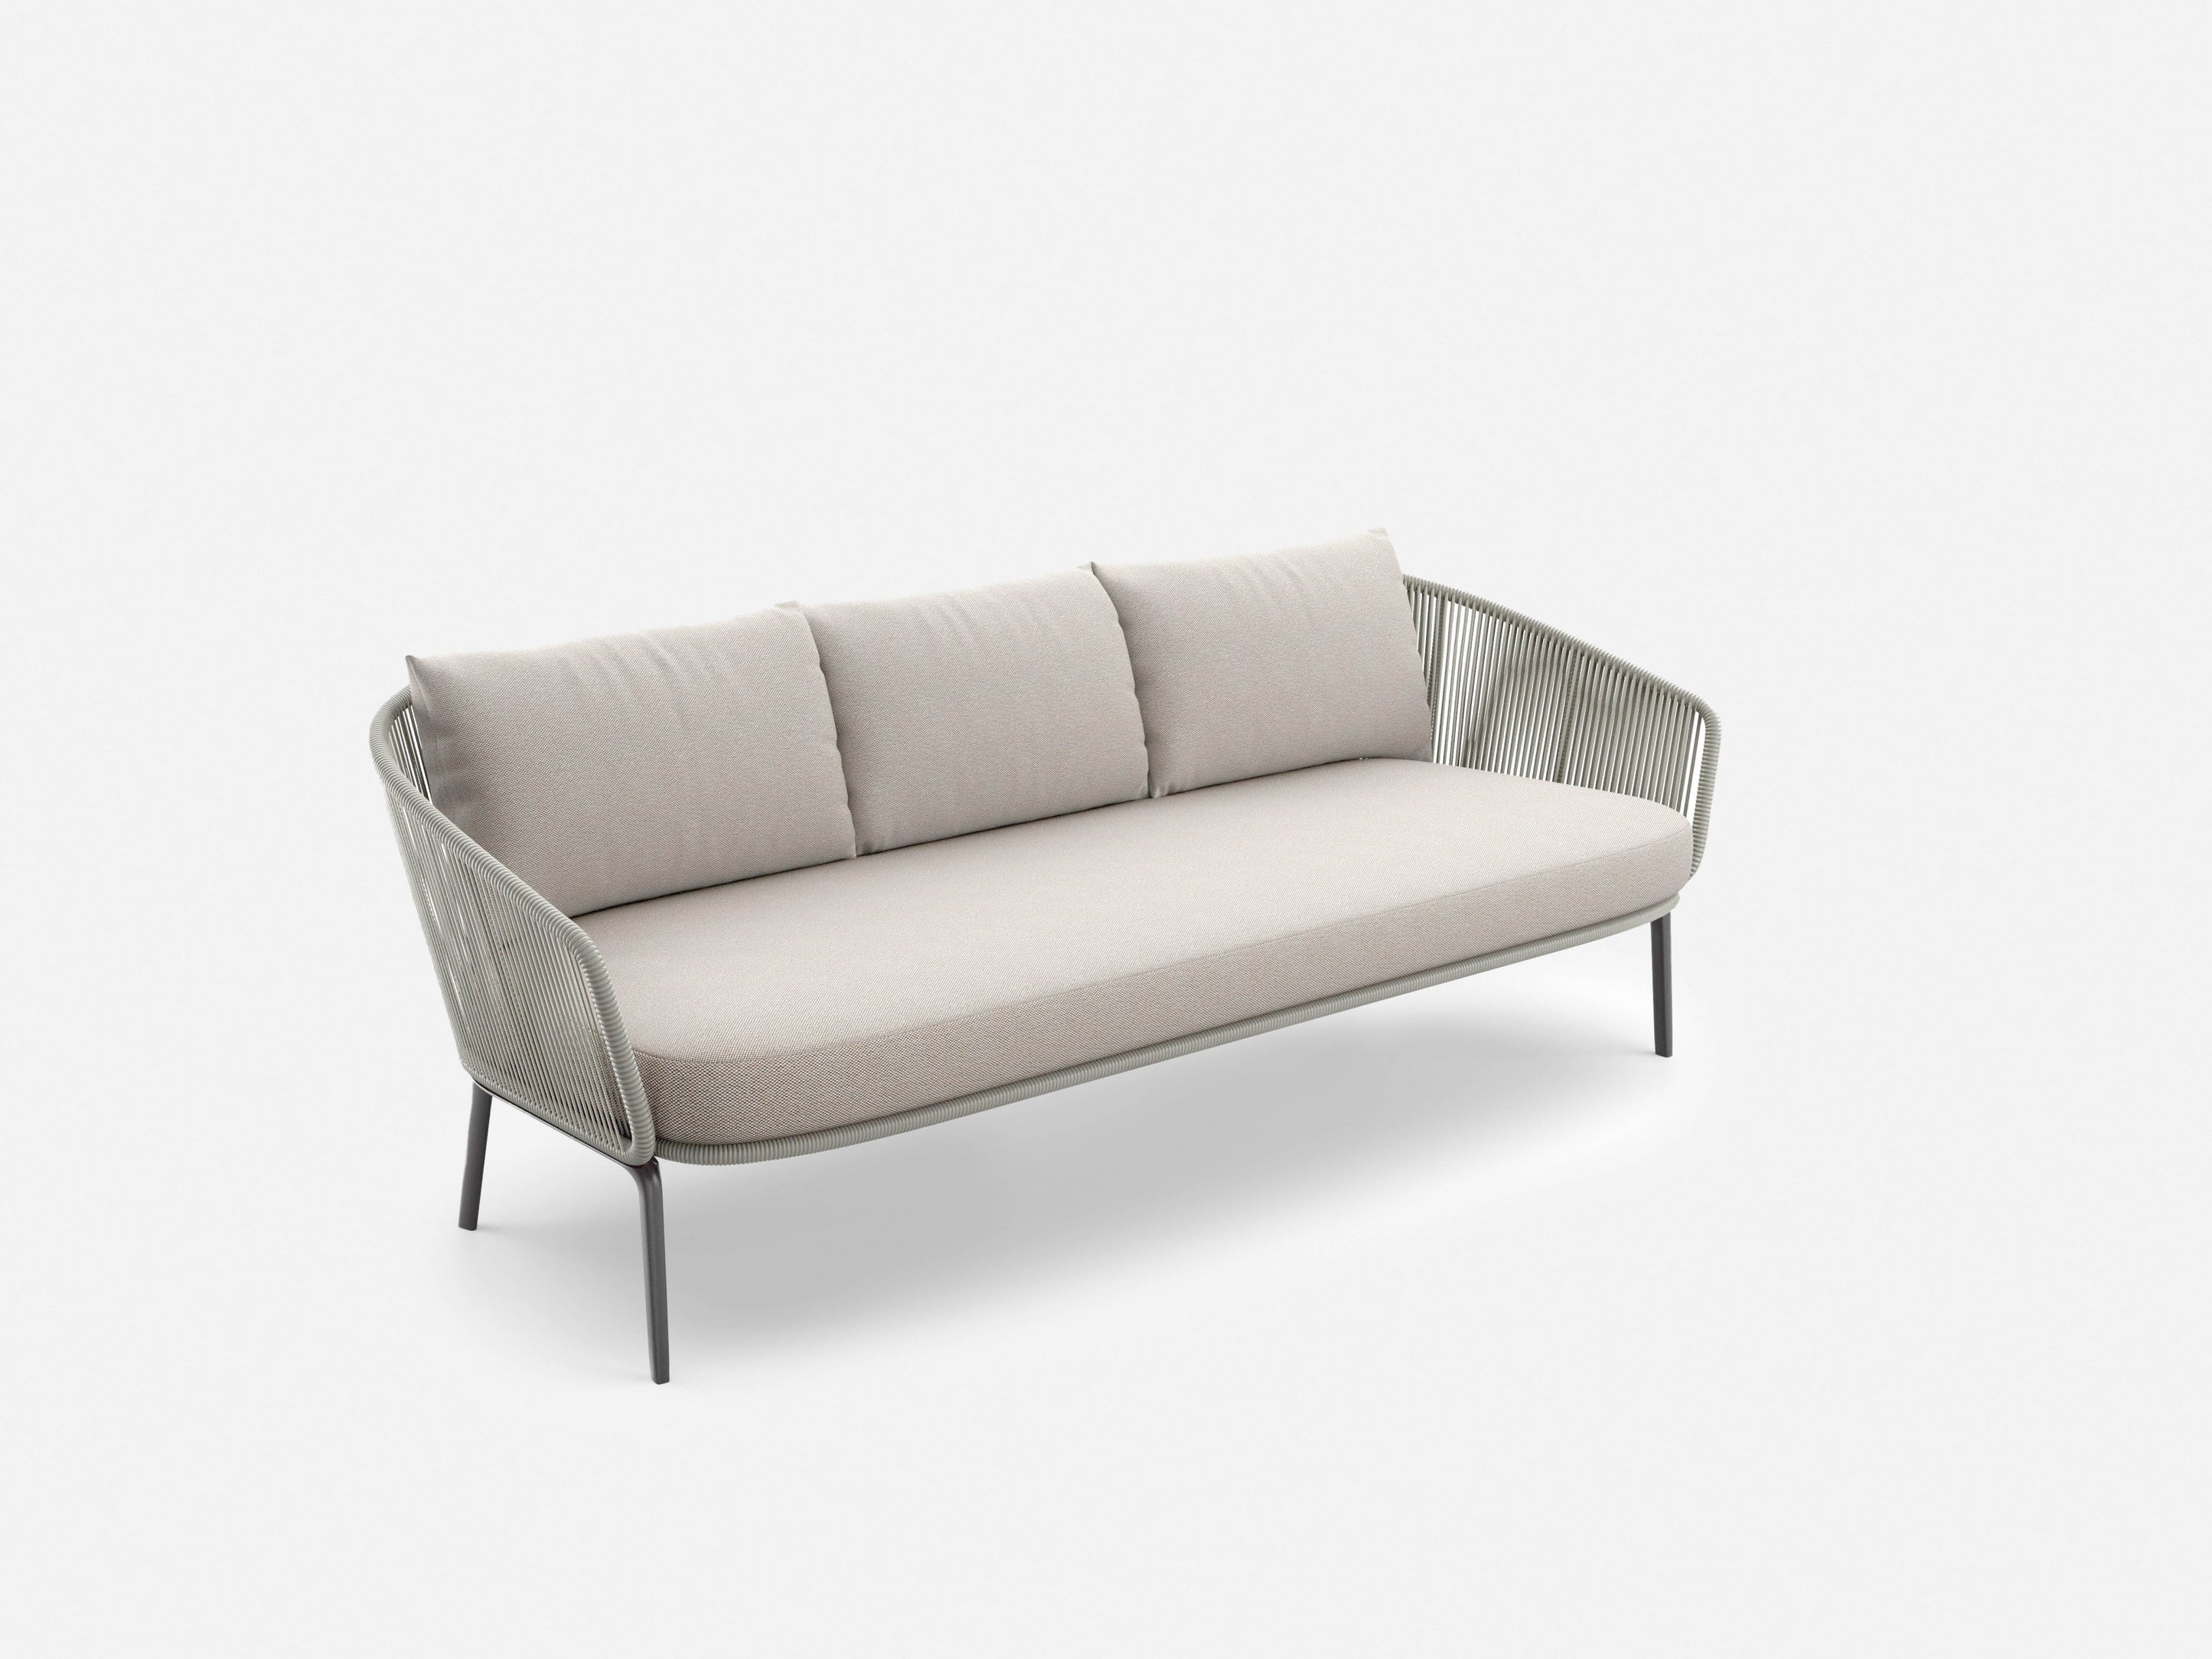 RILLY Sofa | Contemporary Style Furniture | Cosh Living